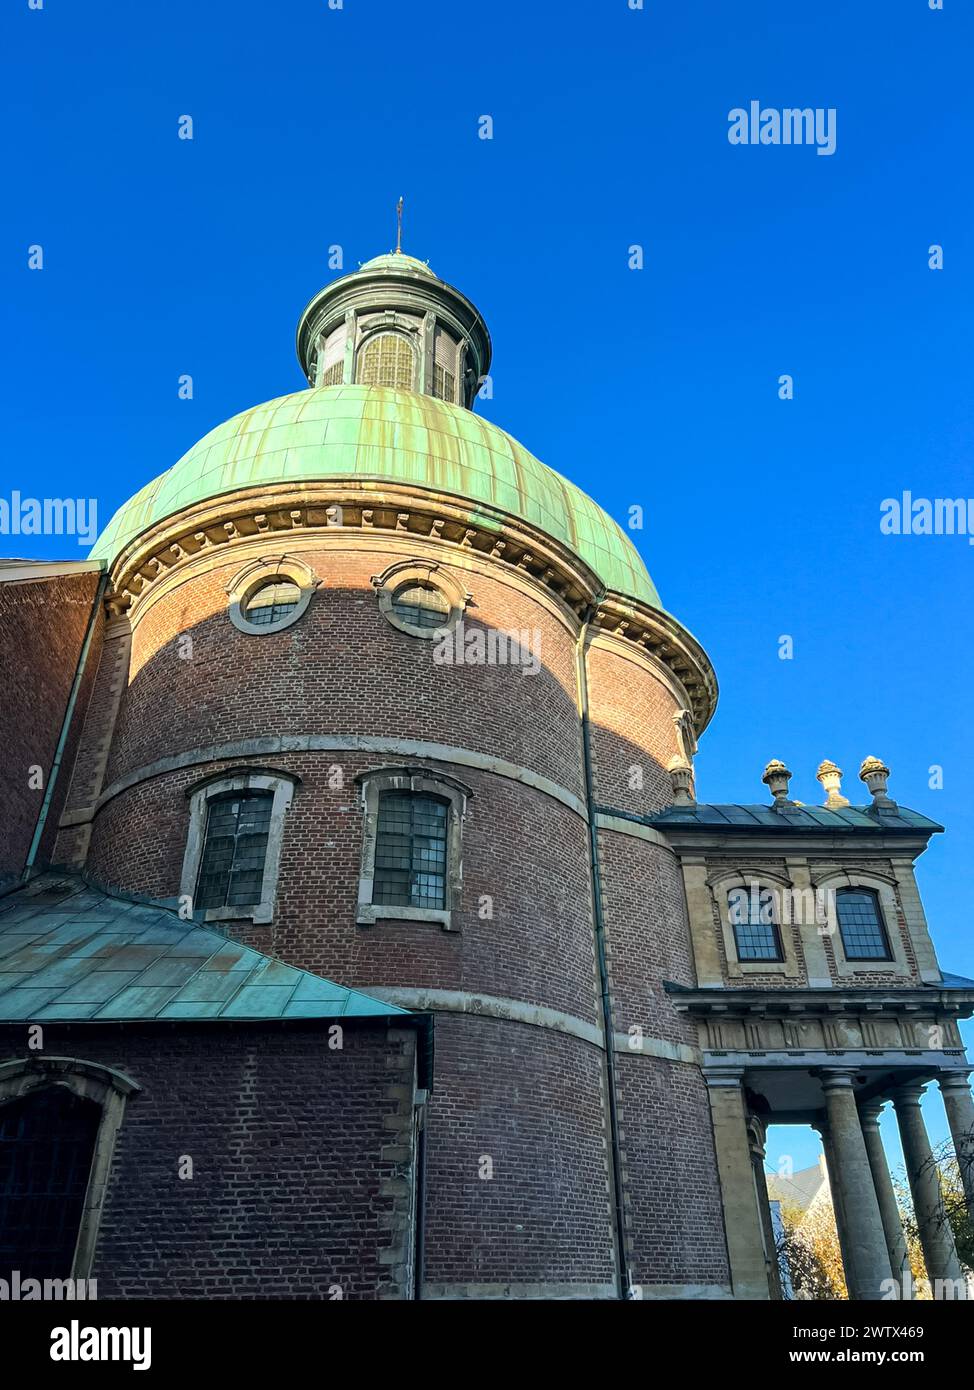 Neoclassical Church with Green Roof, Grand Dome and Ornate Classical Facade Stock Photo